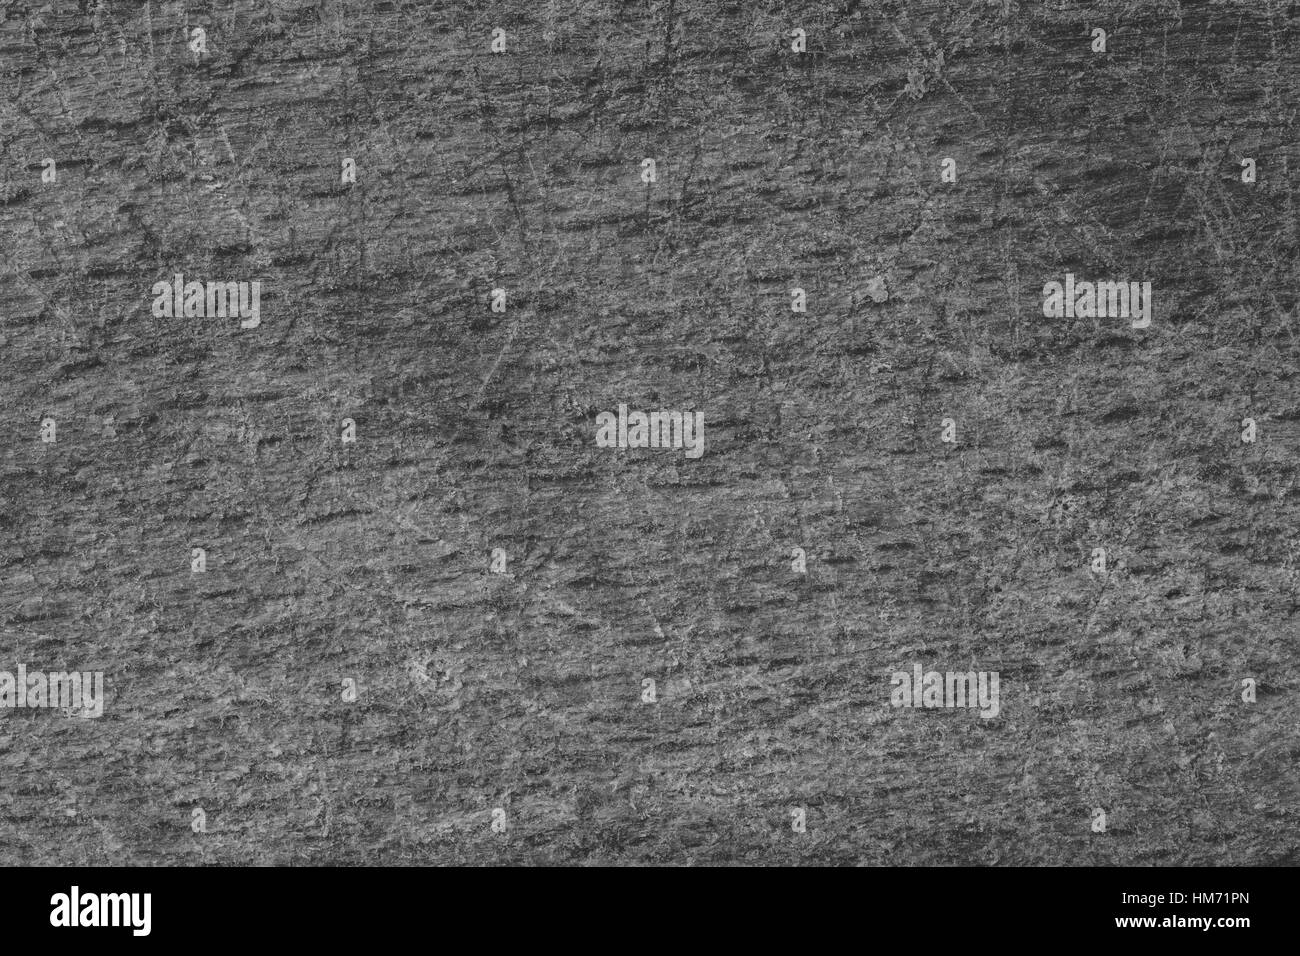 Abstract black and white scratched background with vintage texture. Stock Photo